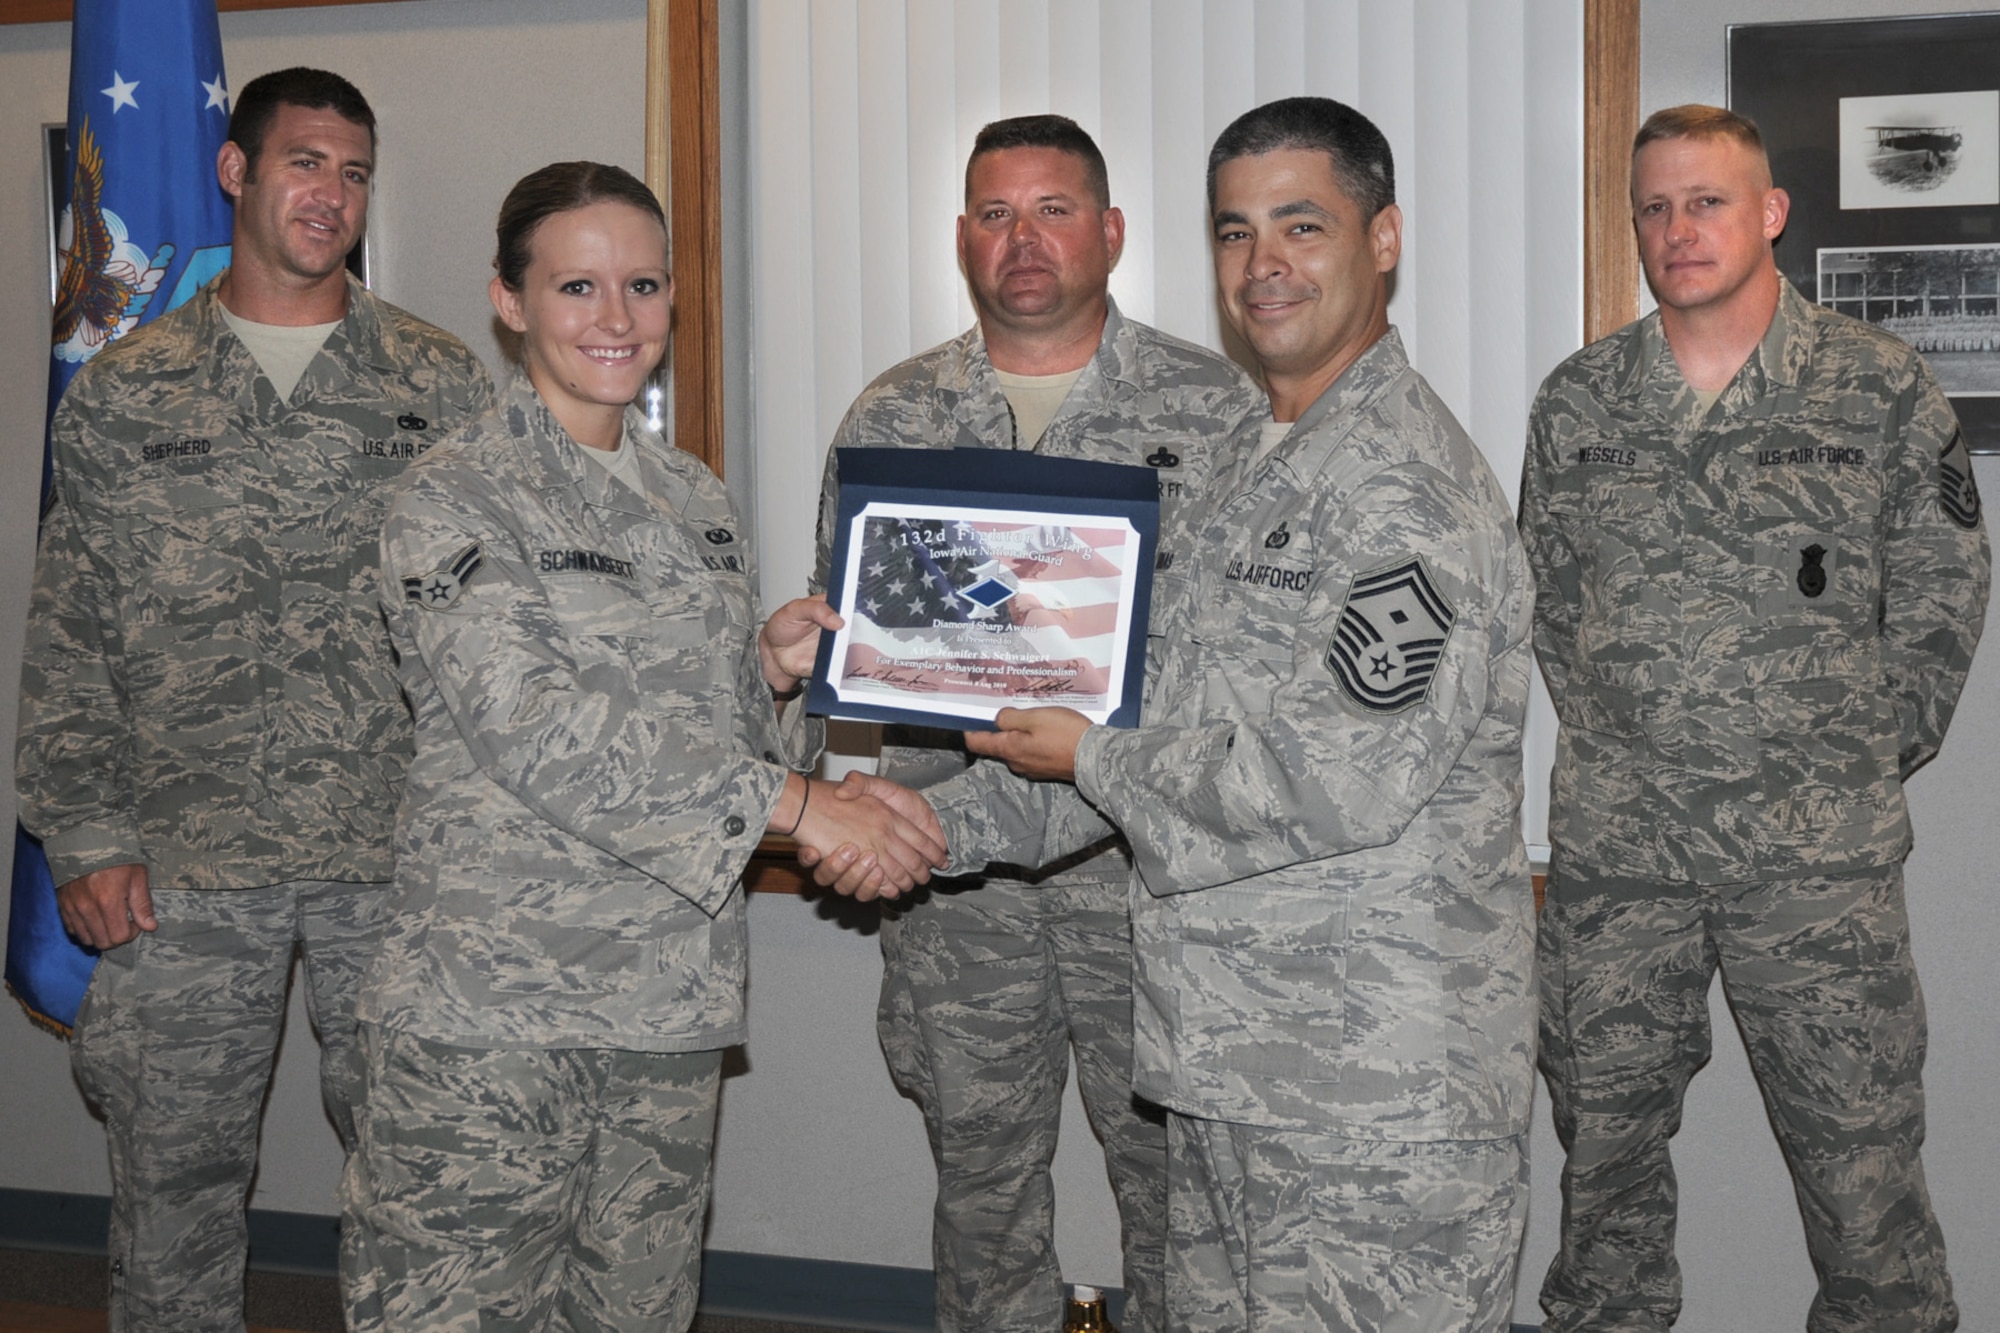 First Sergeants of the 132nd Fighter Wing present Airman 1st Class Jennifer Schwaigert (second from left) with the Diamond Sharp Award at the 132nd Fighter Wing, Des Moines, Iowa, on August 8, 2010.  (US Air Force photo/Staff Sgt. Linda E. Kephart)(Released)